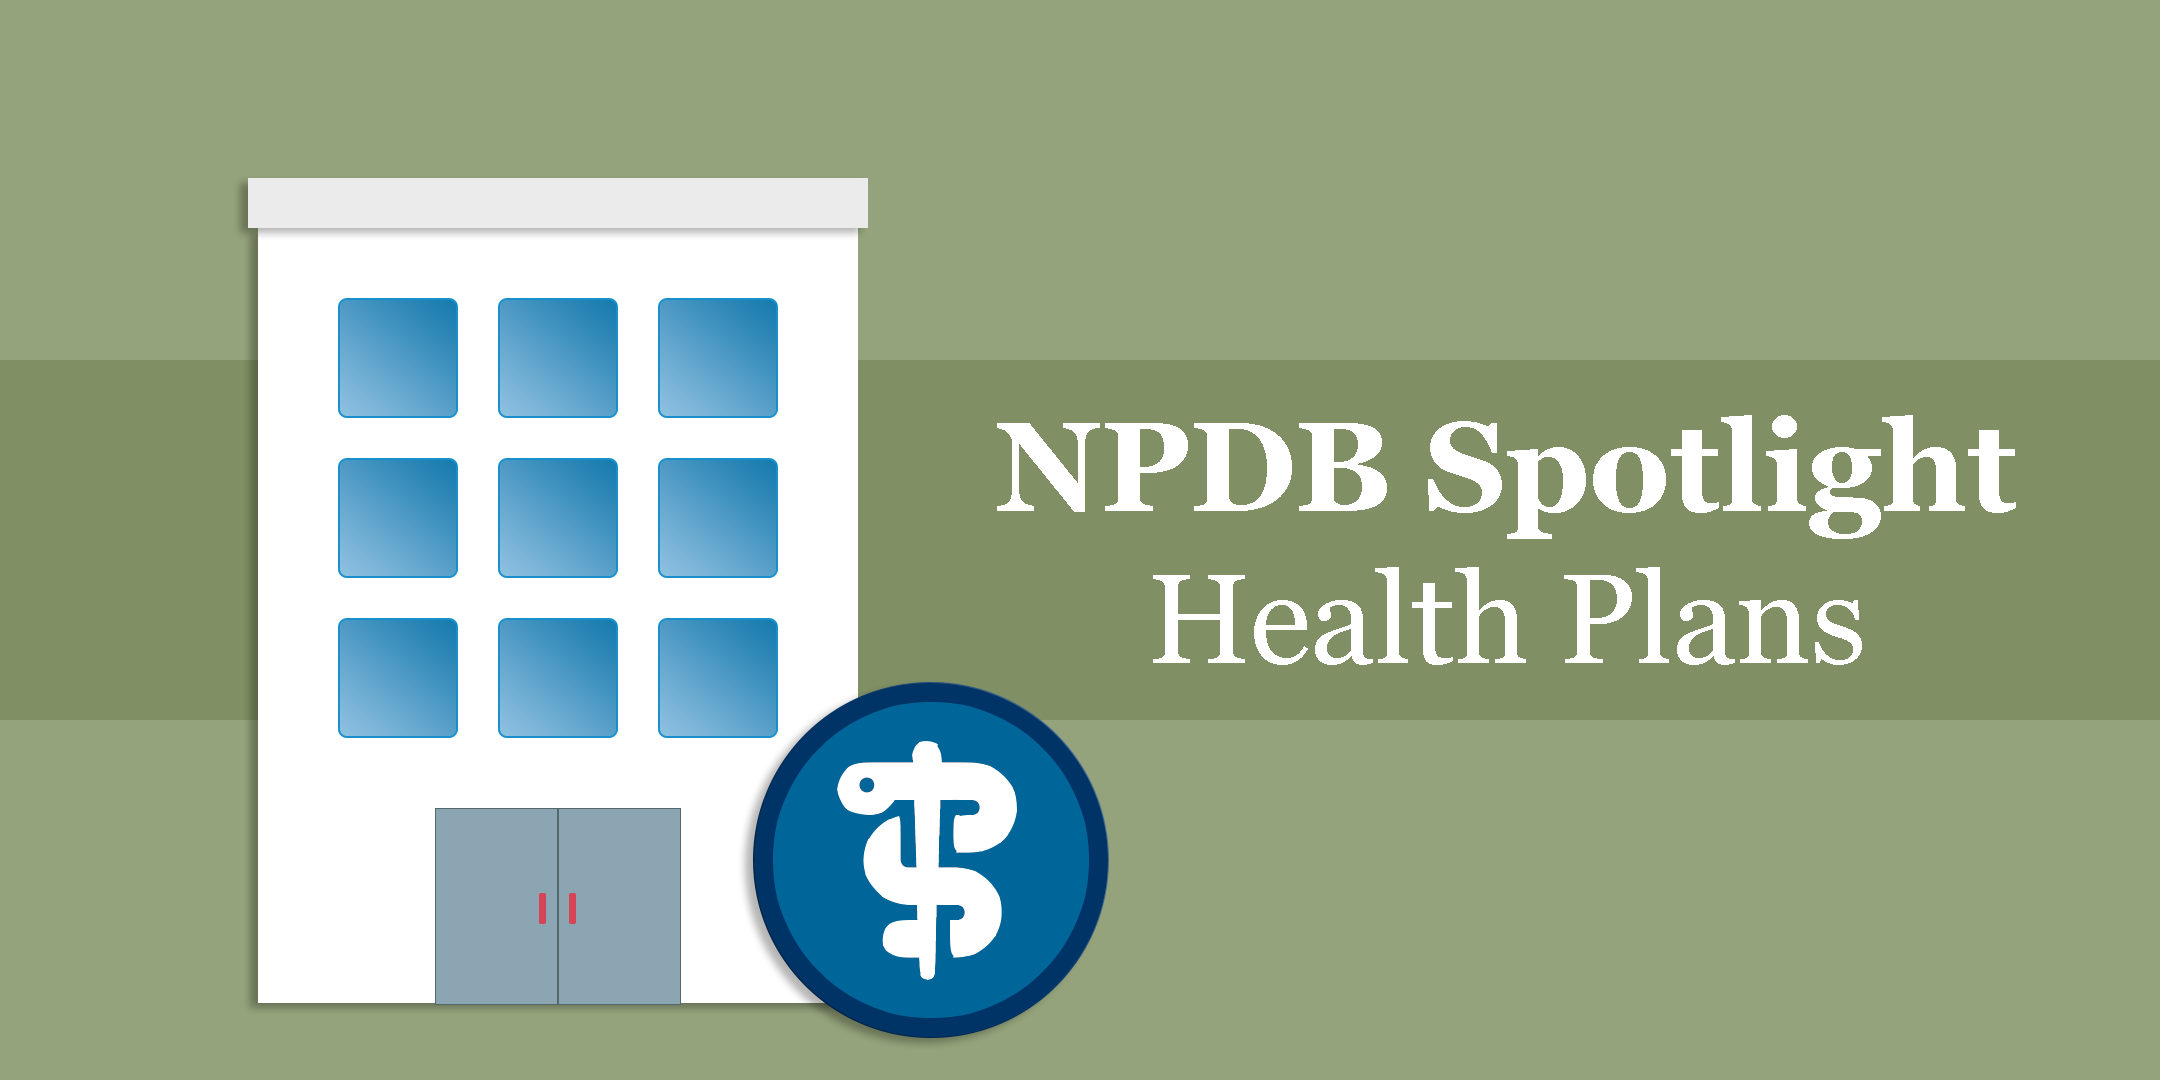 Image with a hospital and NPDB Spotlight Health Plans text